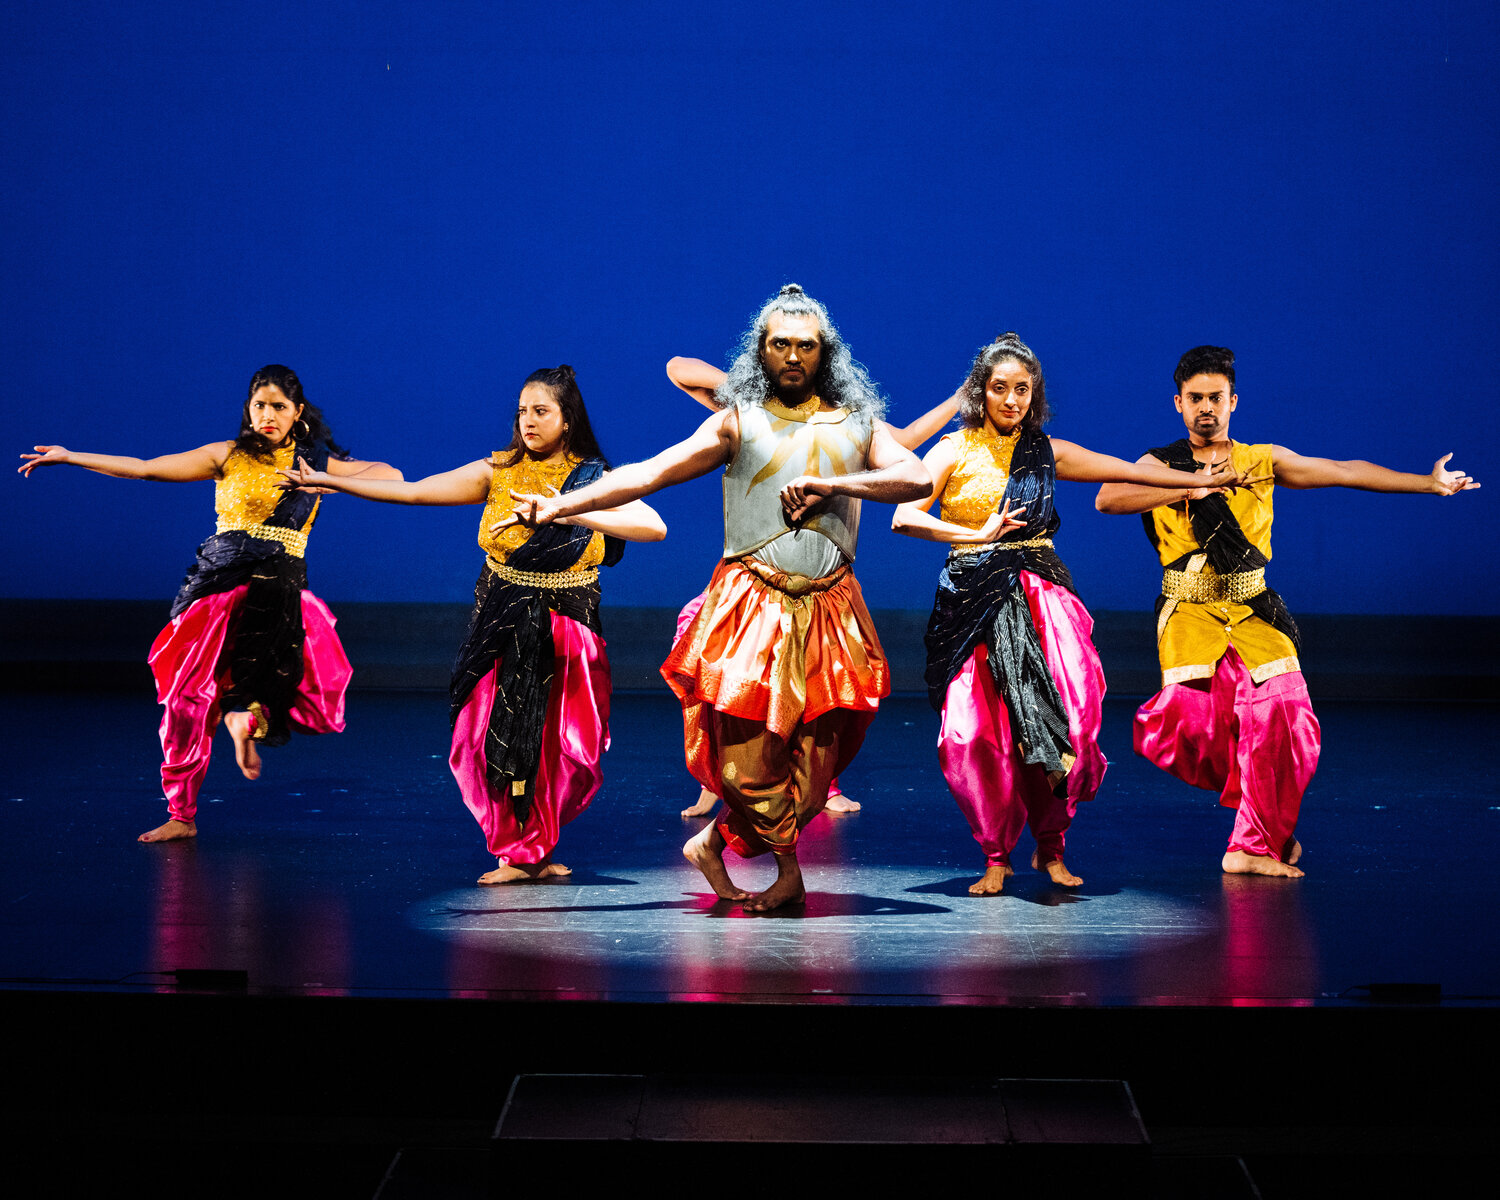 Over 70 cast members perform in "Acceptance, Kindness, Support" at the Cowles Center as part of a production by the South Asian Arts & Theater House.